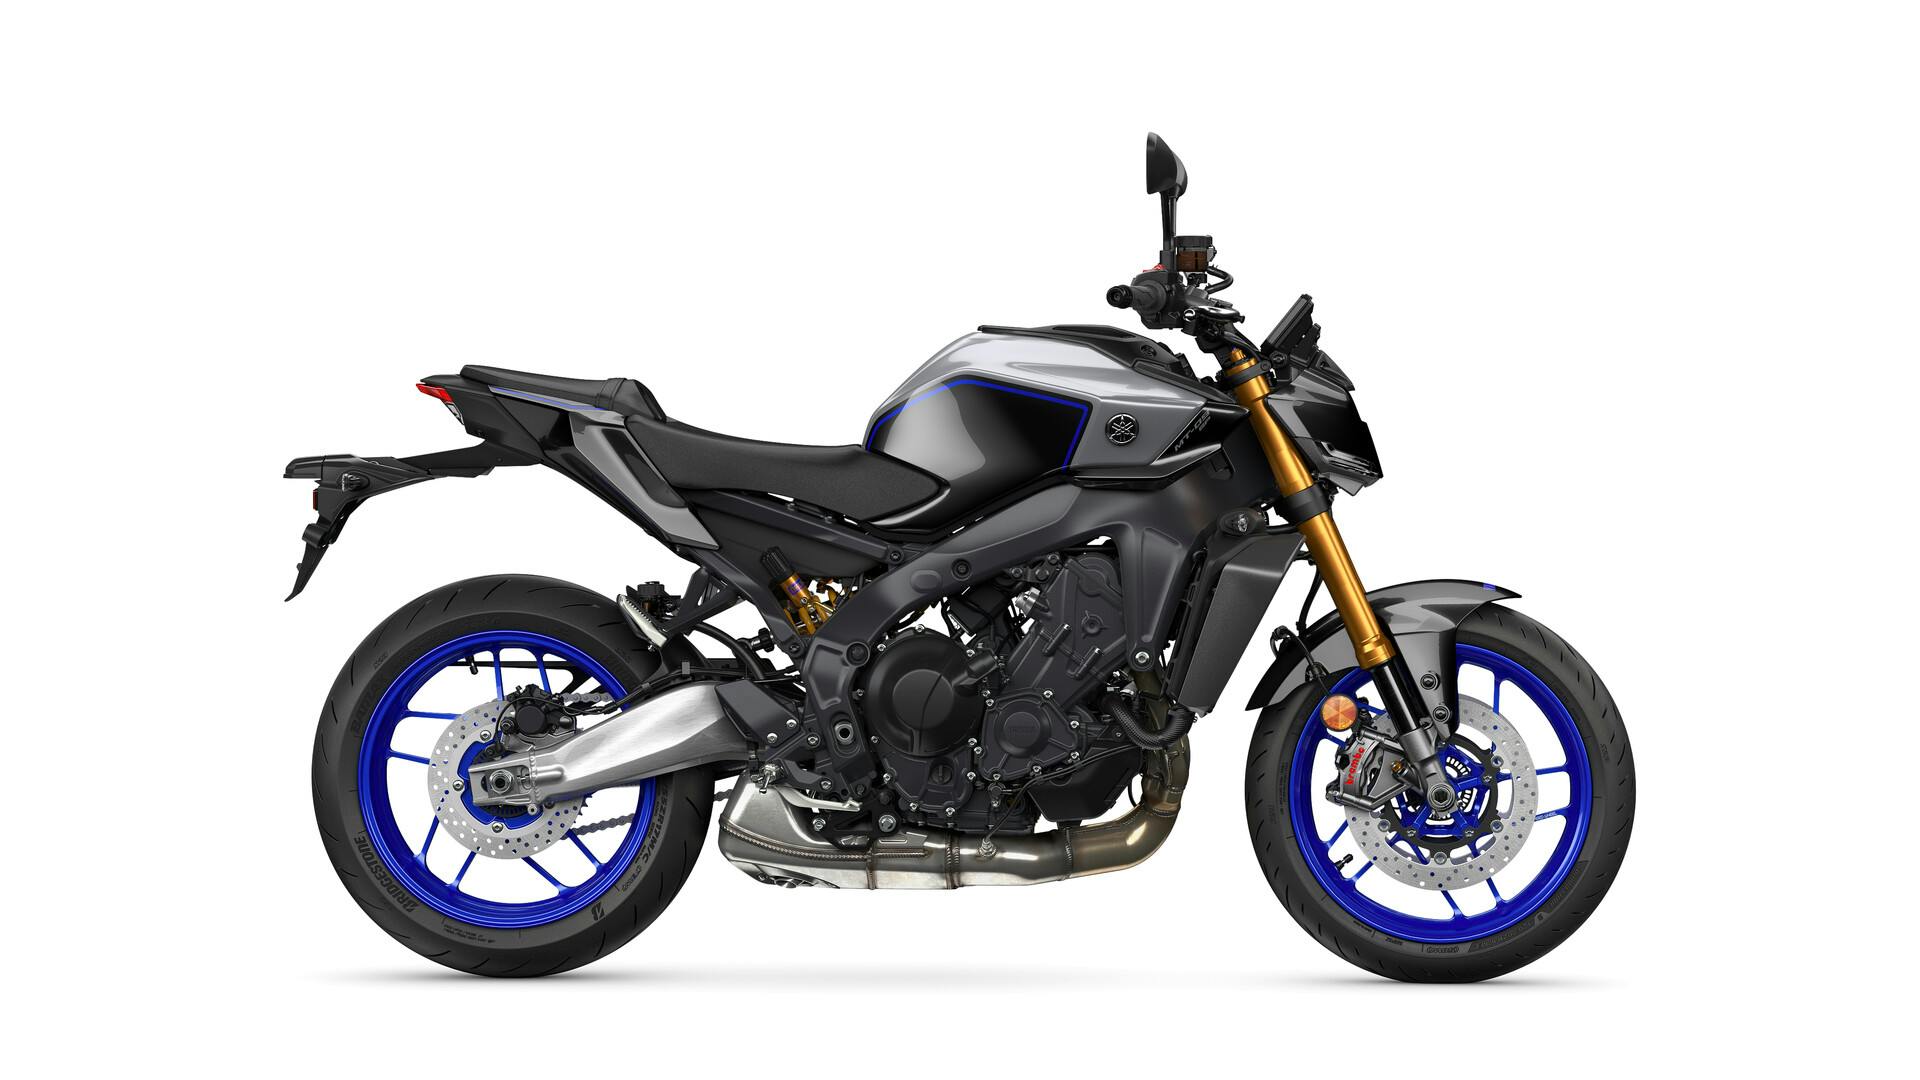 Yamaha MT-09SP in icon performance colour